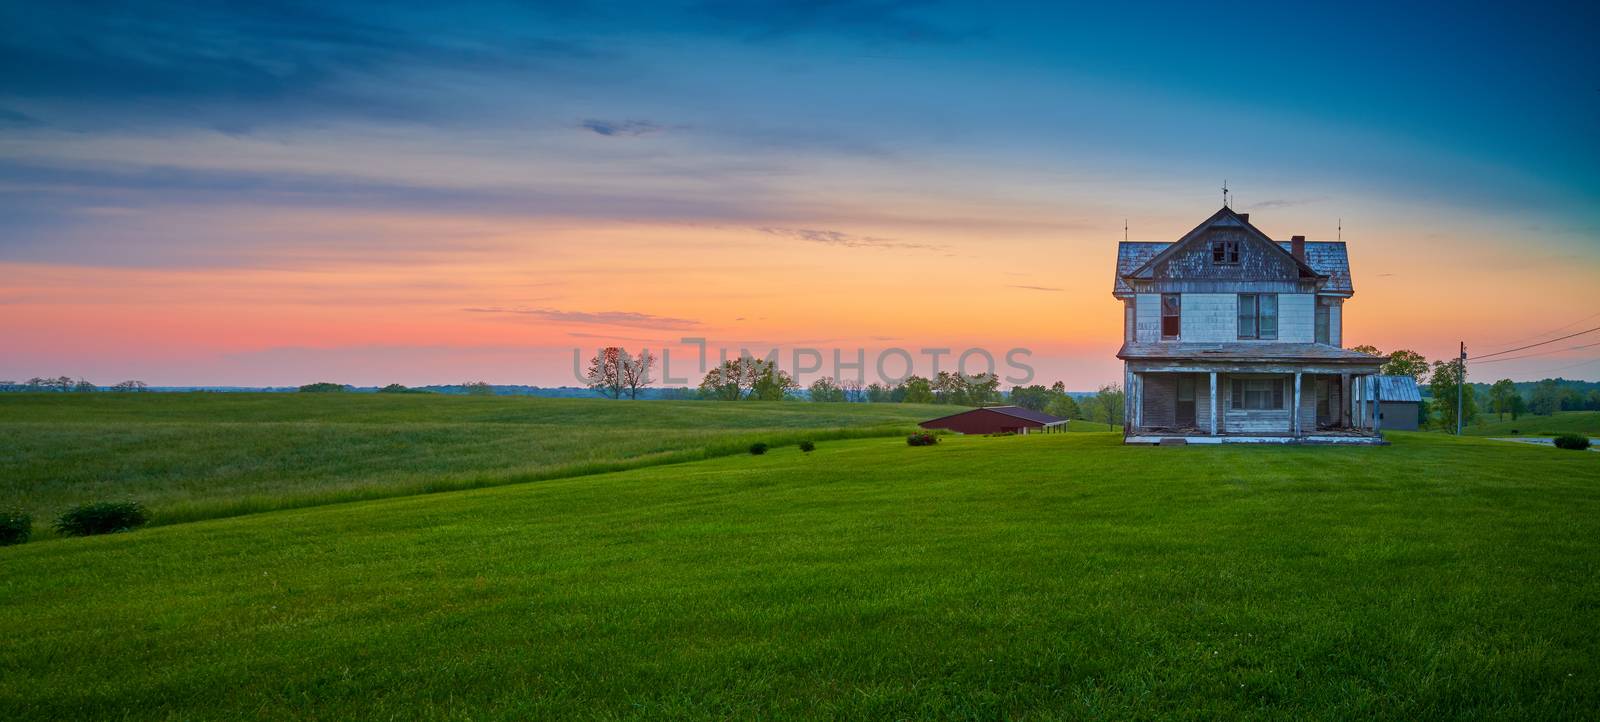 Abandoned Old Farm House at Dusk by patrickstock